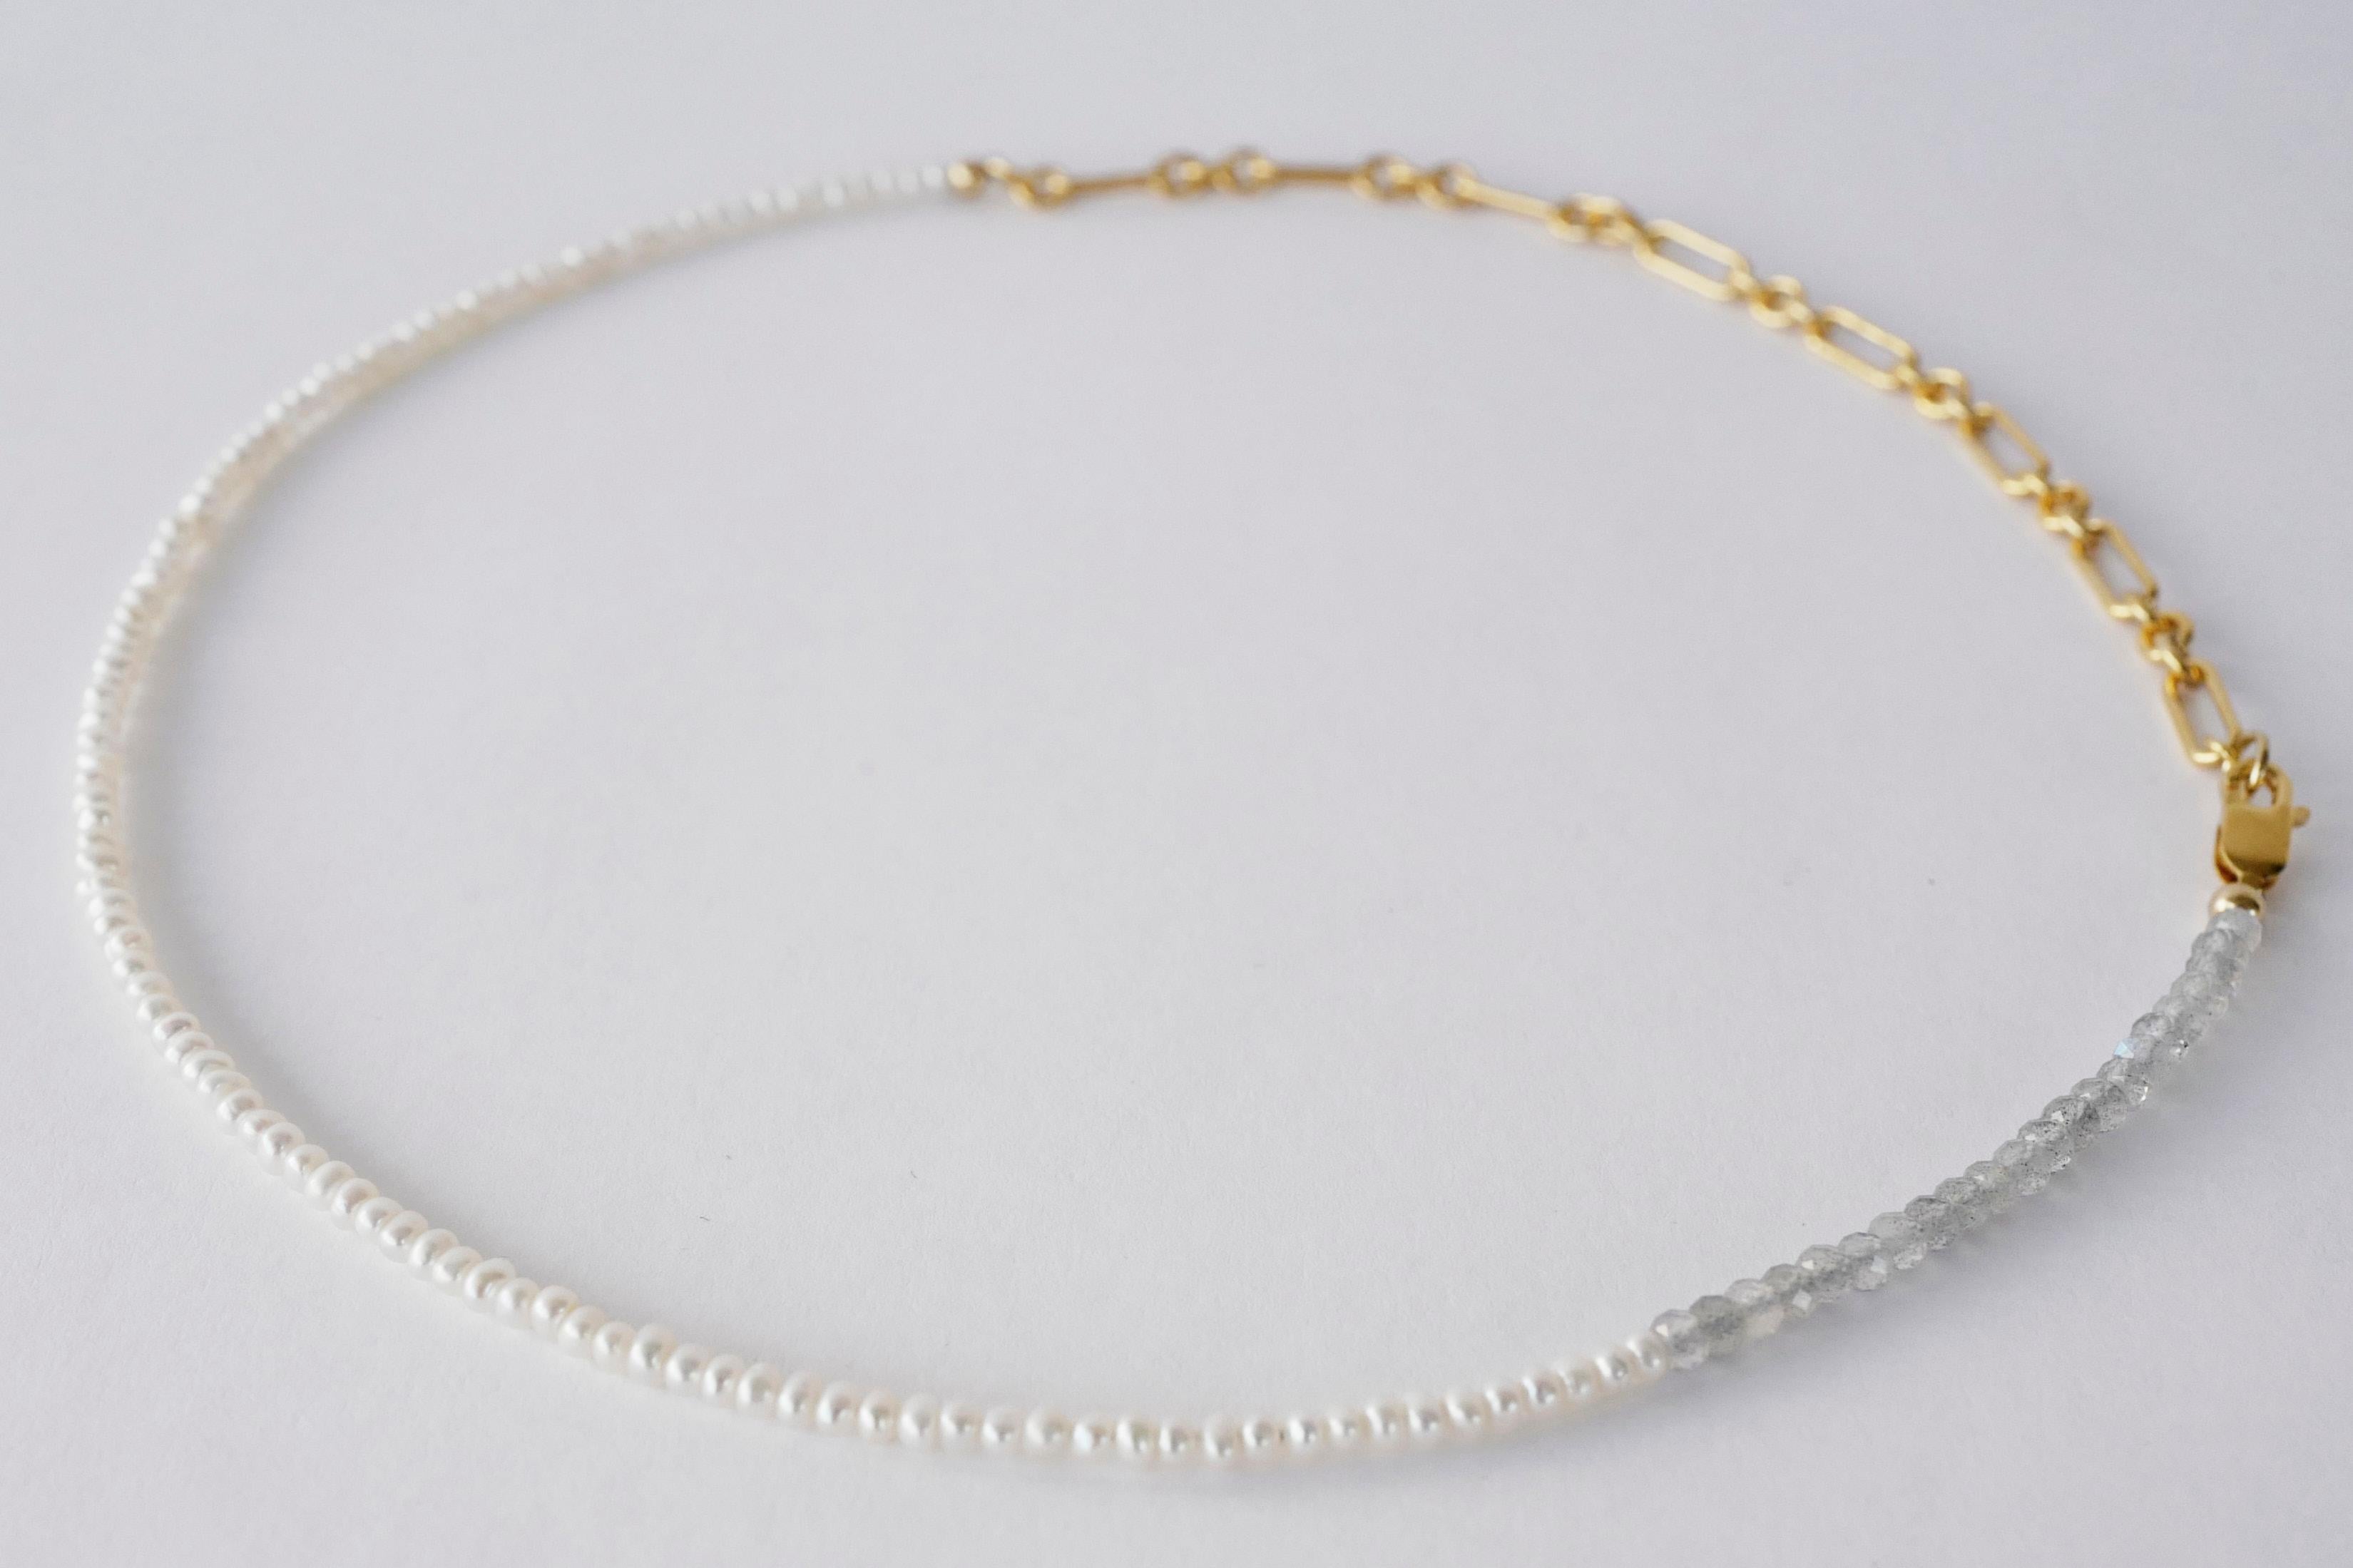 Romantic White Pearl Necklace labradorite Gold Tone Chain Beaded Choker J Dauphin For Sale